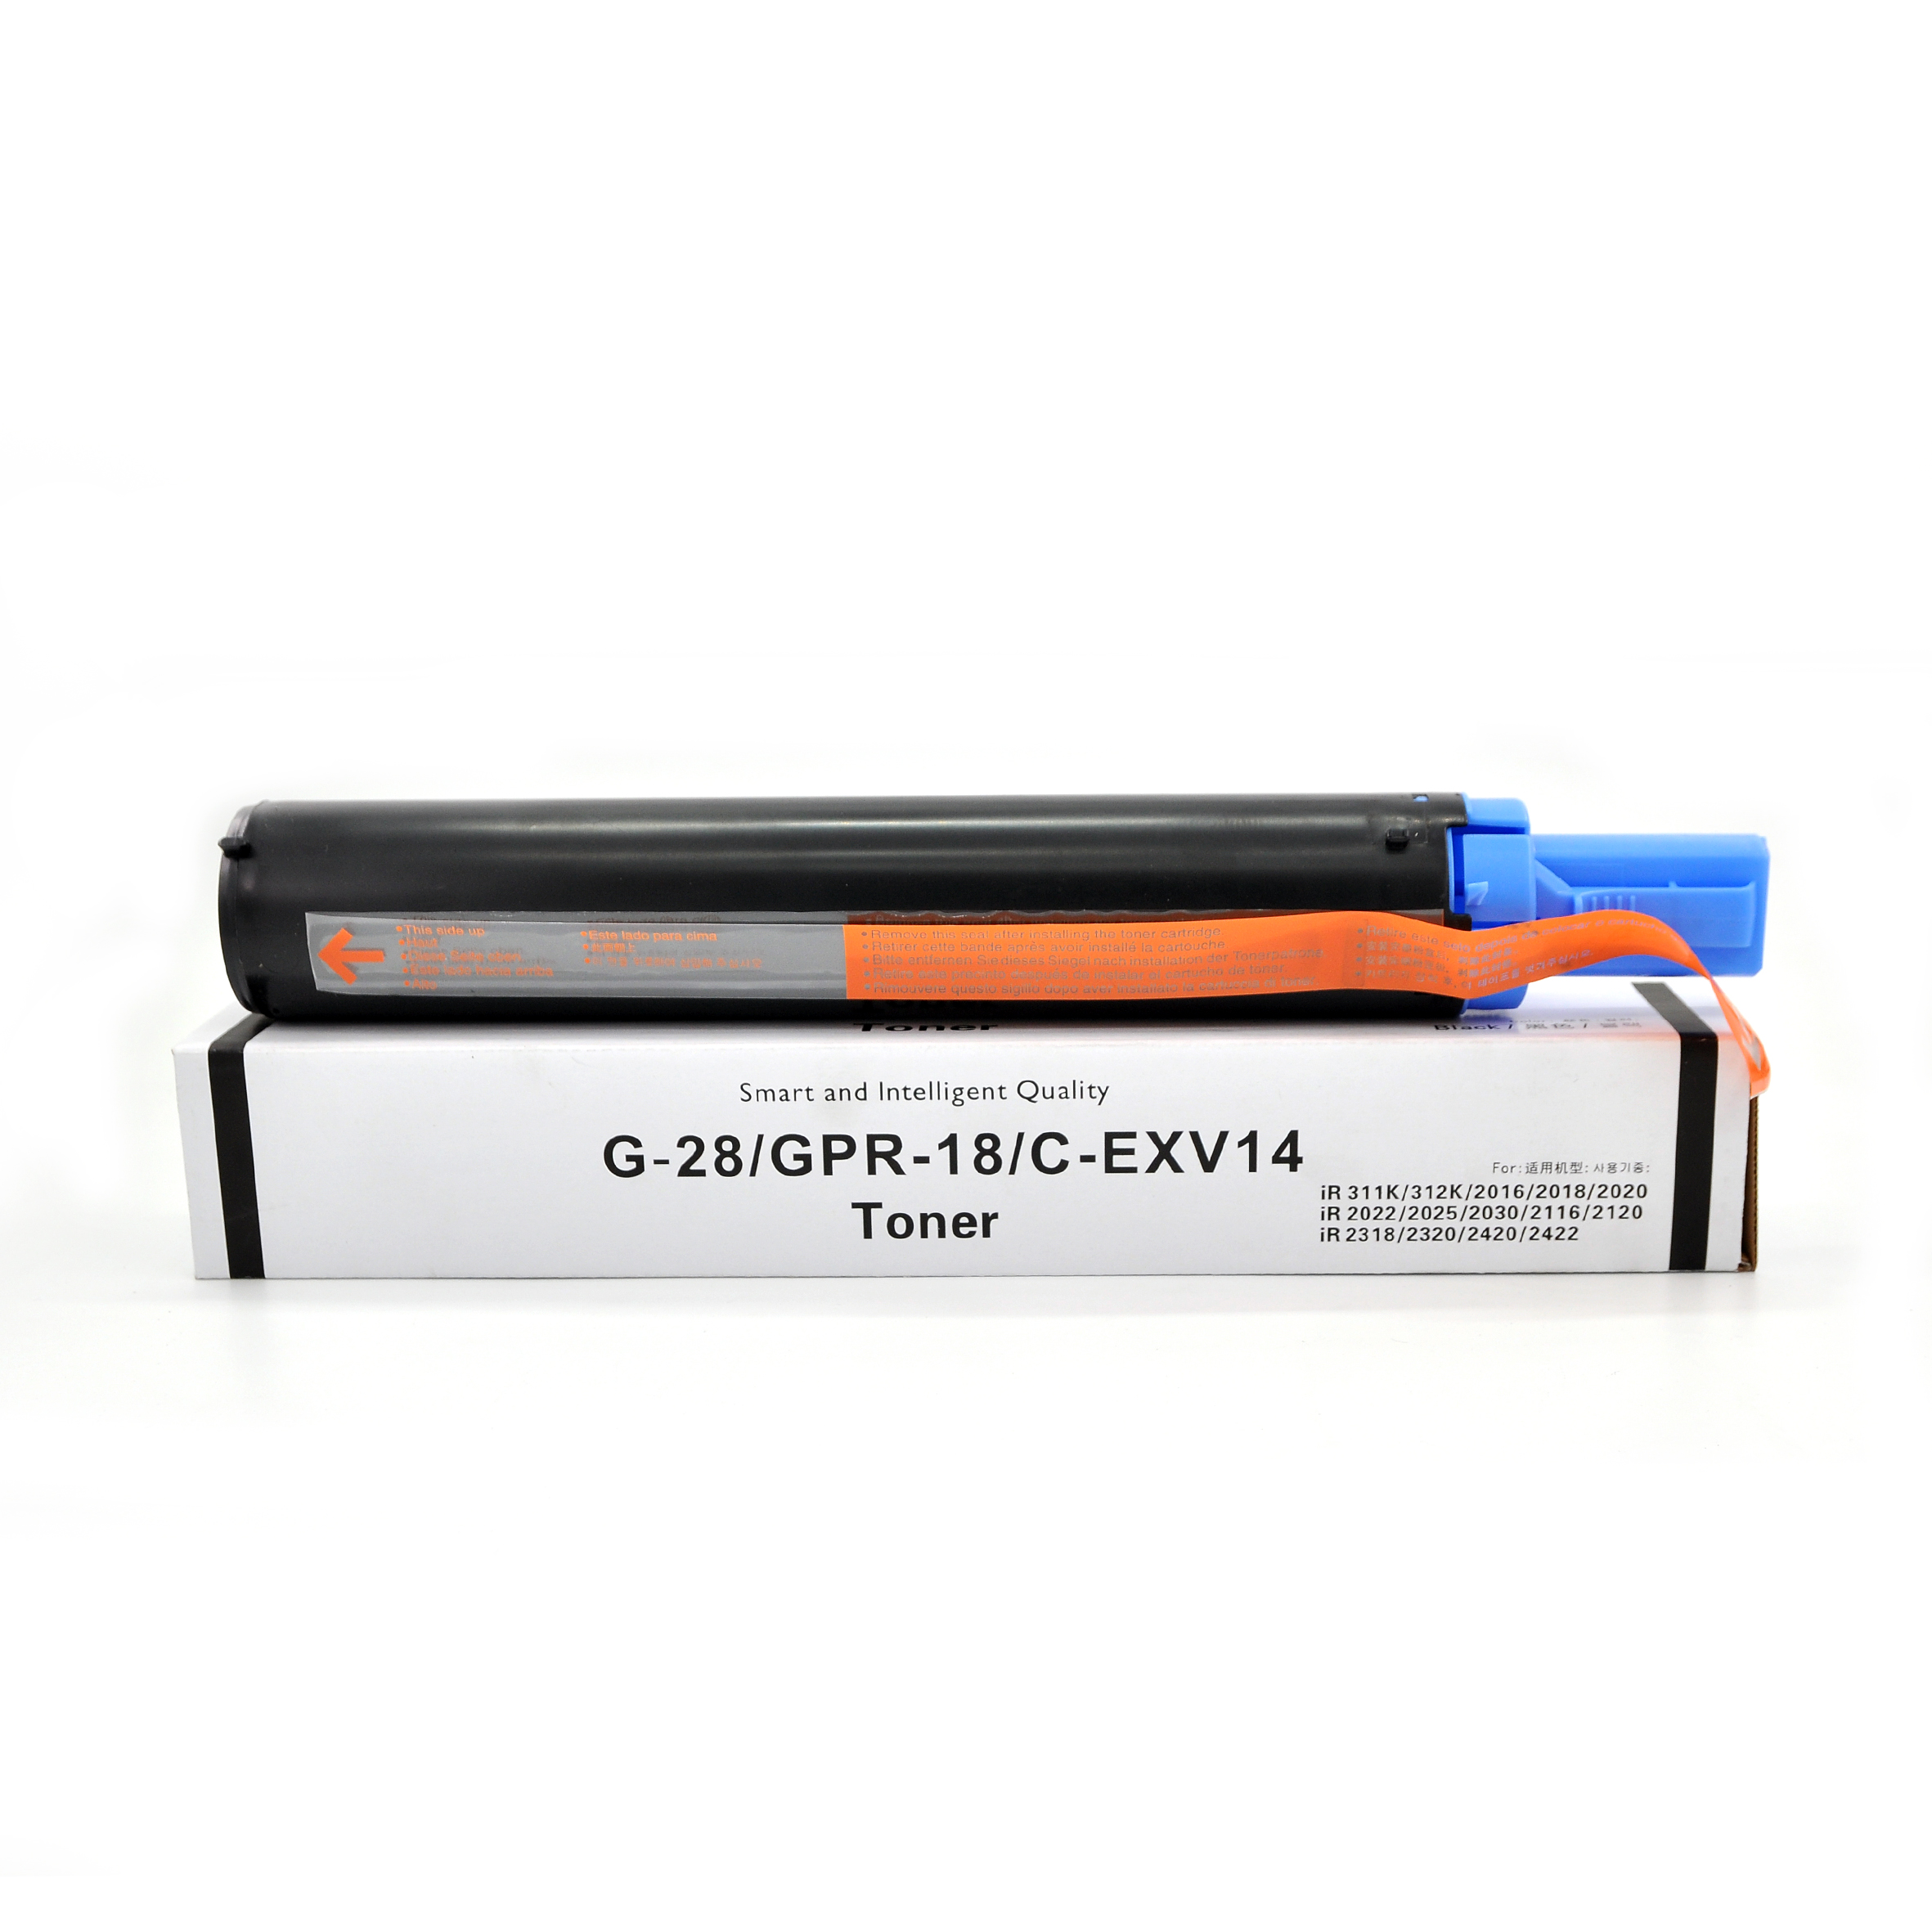 China Oem Odm China Toner Cartridge For Sharp Ar 5731 Npg28 Copier Toner Cartridges For Use In Canon Ir16 Asc Toner Factory And Suppliers Asc Toner